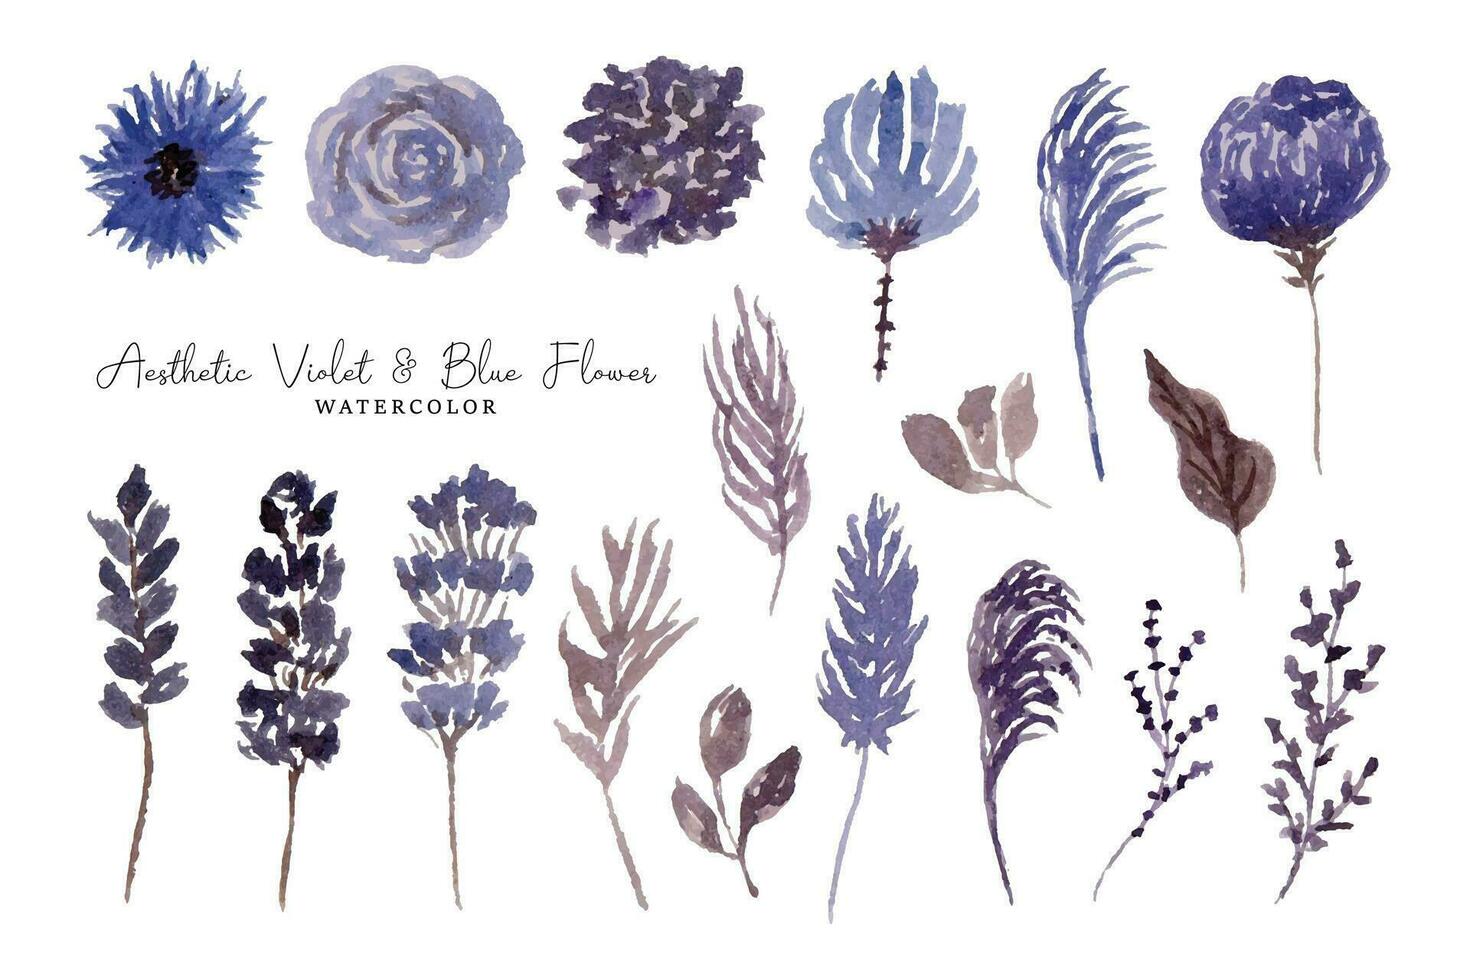 Aesthetic Blue Dried Flower Watercolor Collection vector